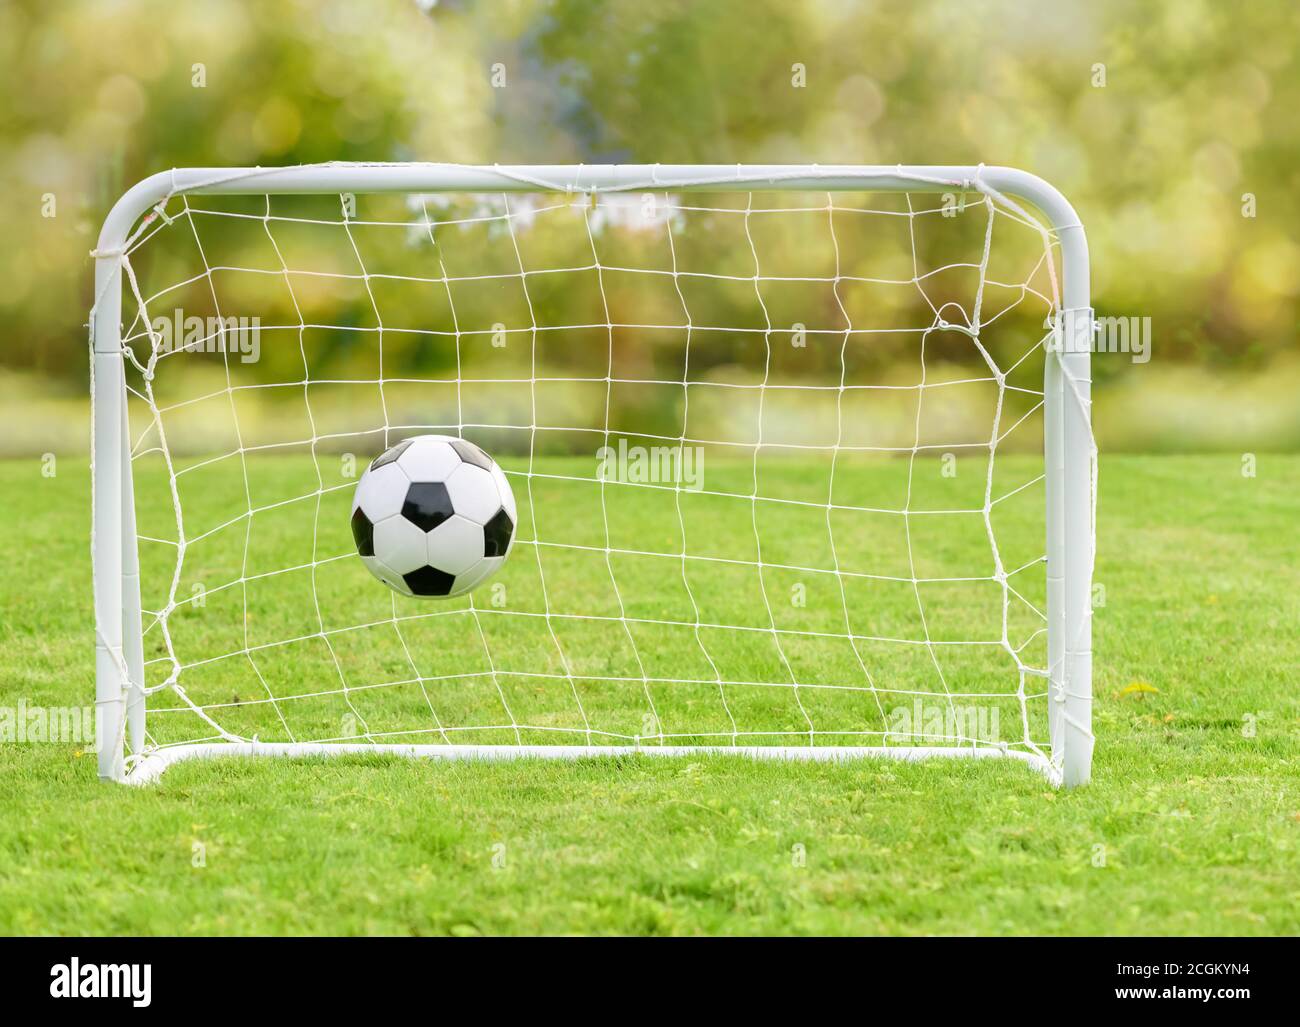 Generic football (soccer) ball hits net of mini goal as concept of recreational sport and family fun Stock Photo